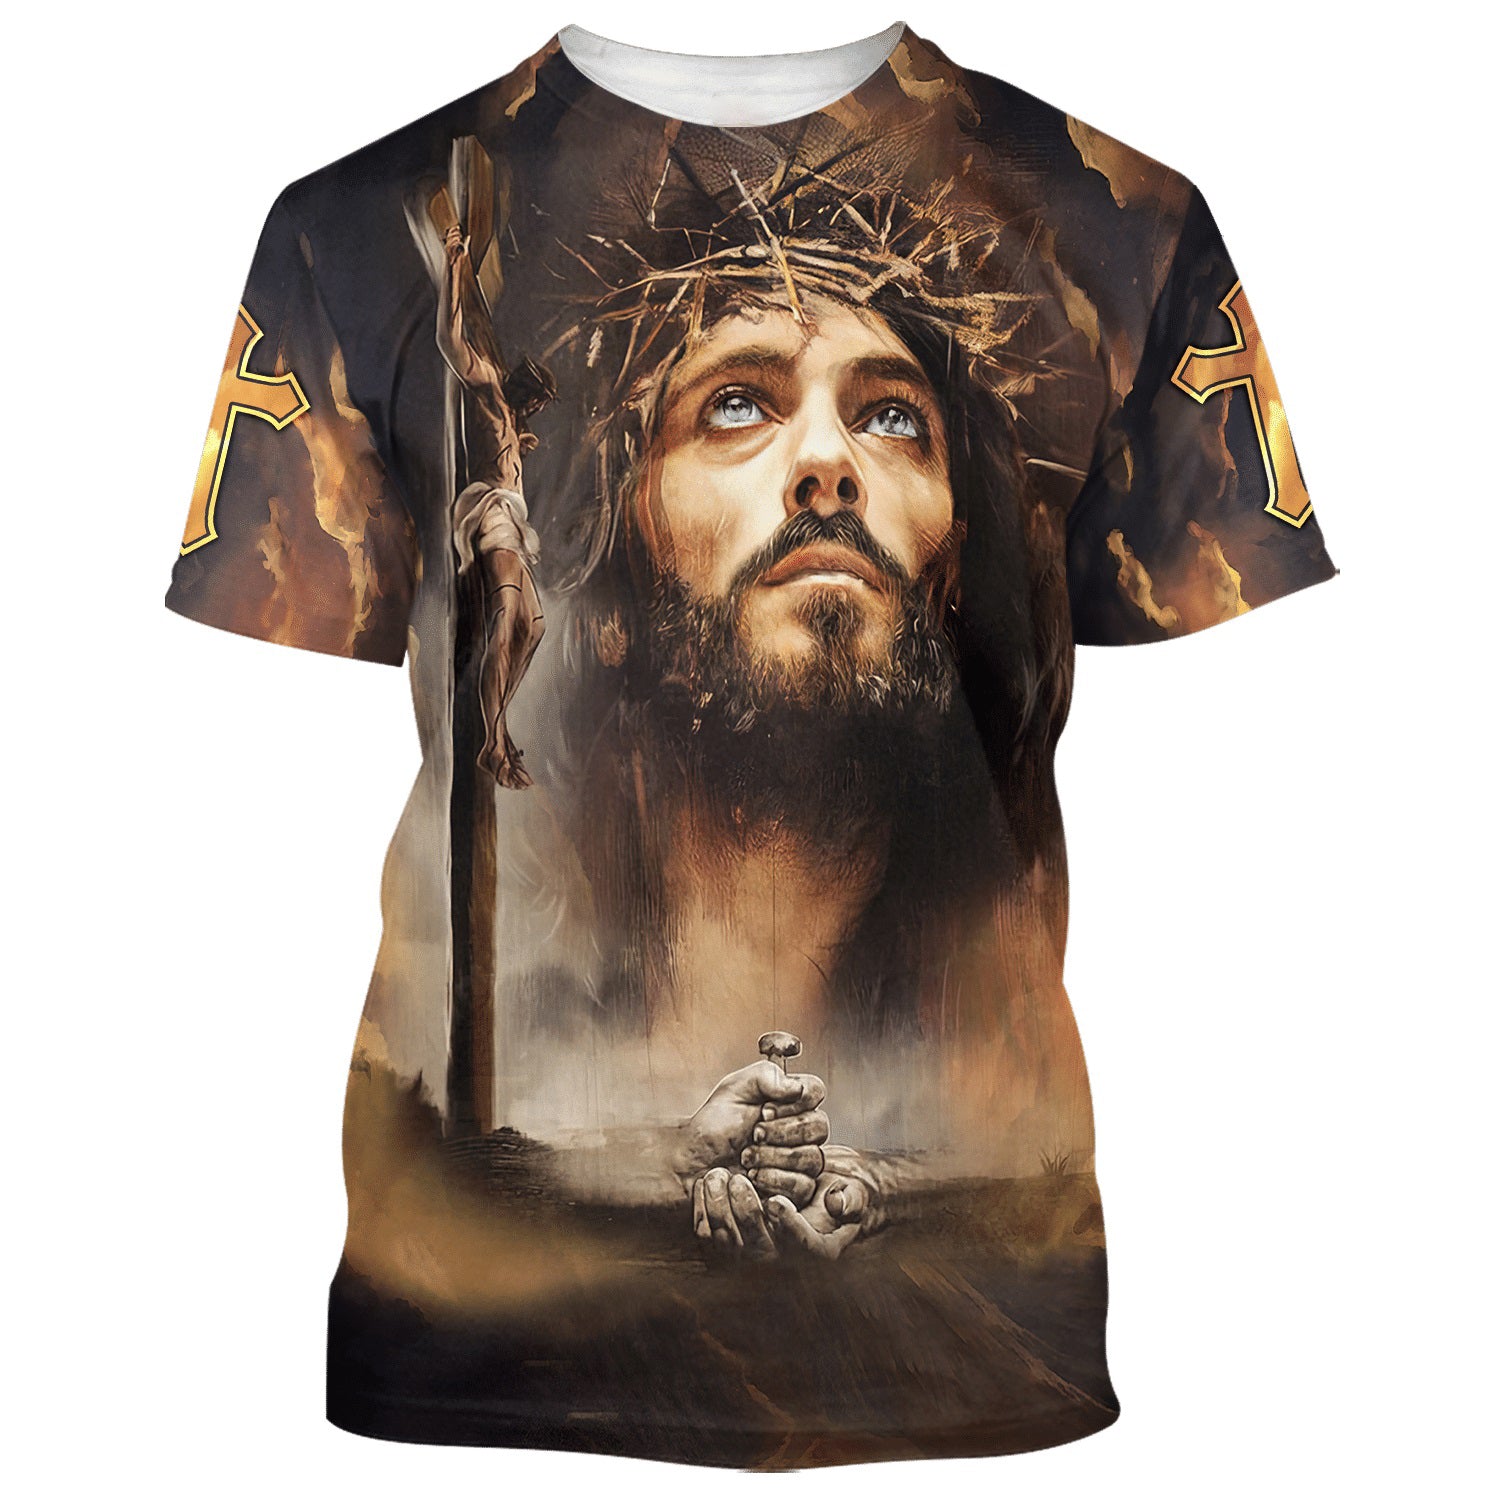 Jesus Christ Crucified On The Cross 3d T-Shirts - Christian Shirts For Men&Women